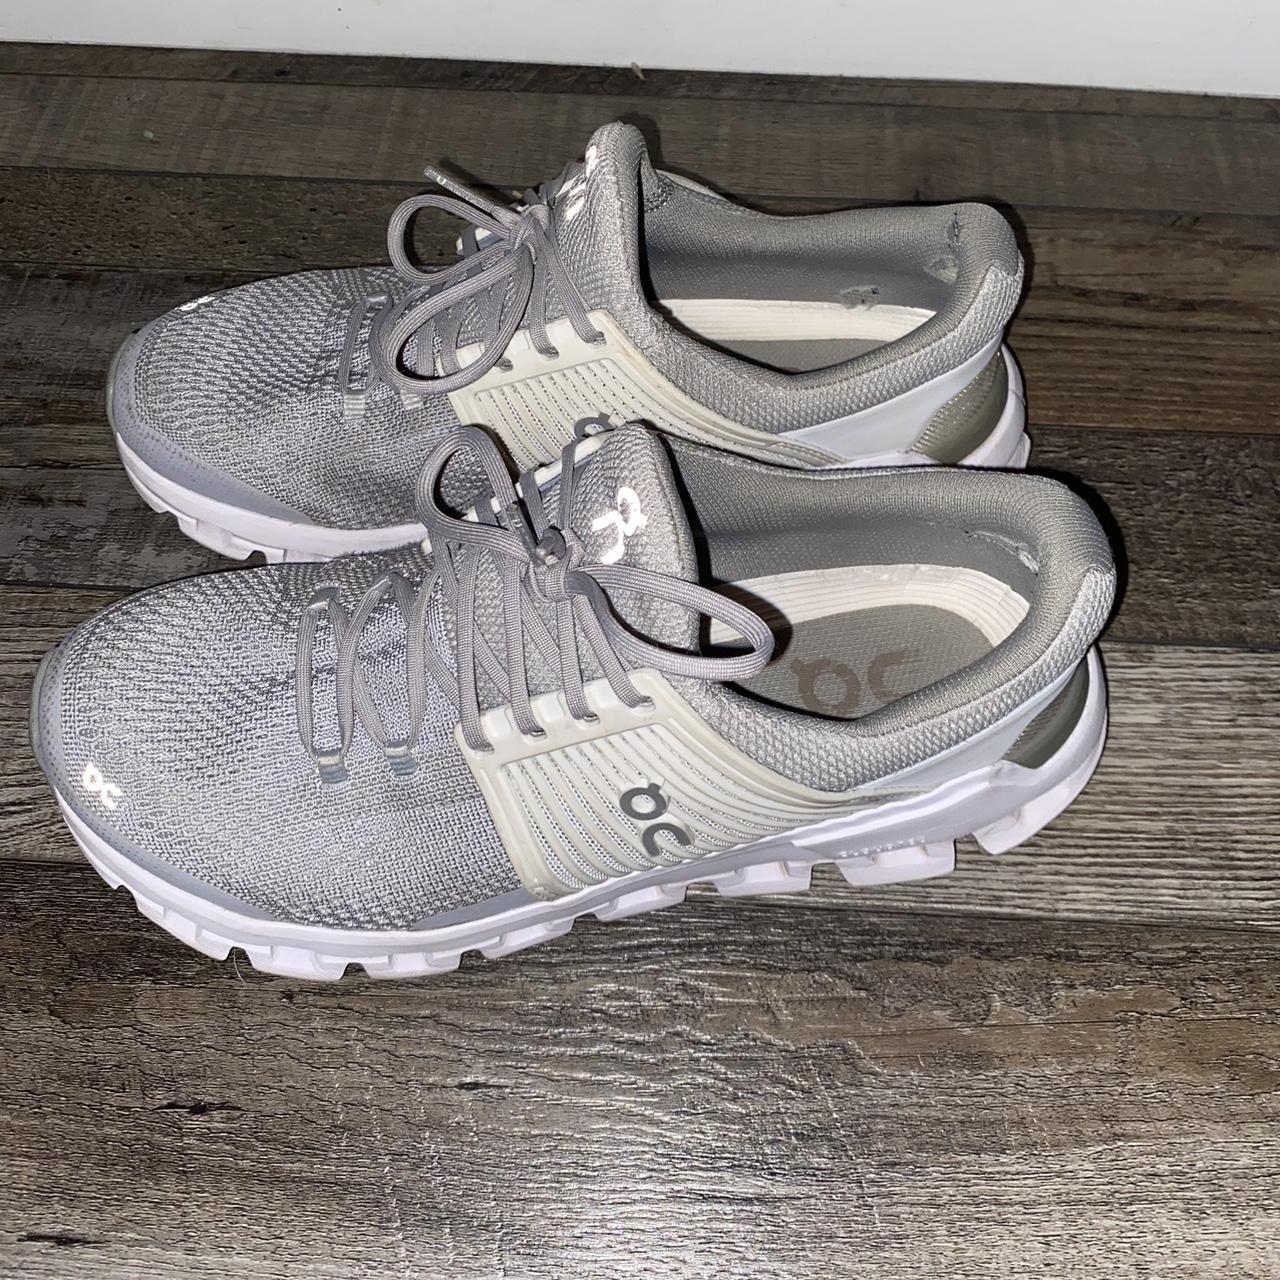 Women's Grey and White Trainers